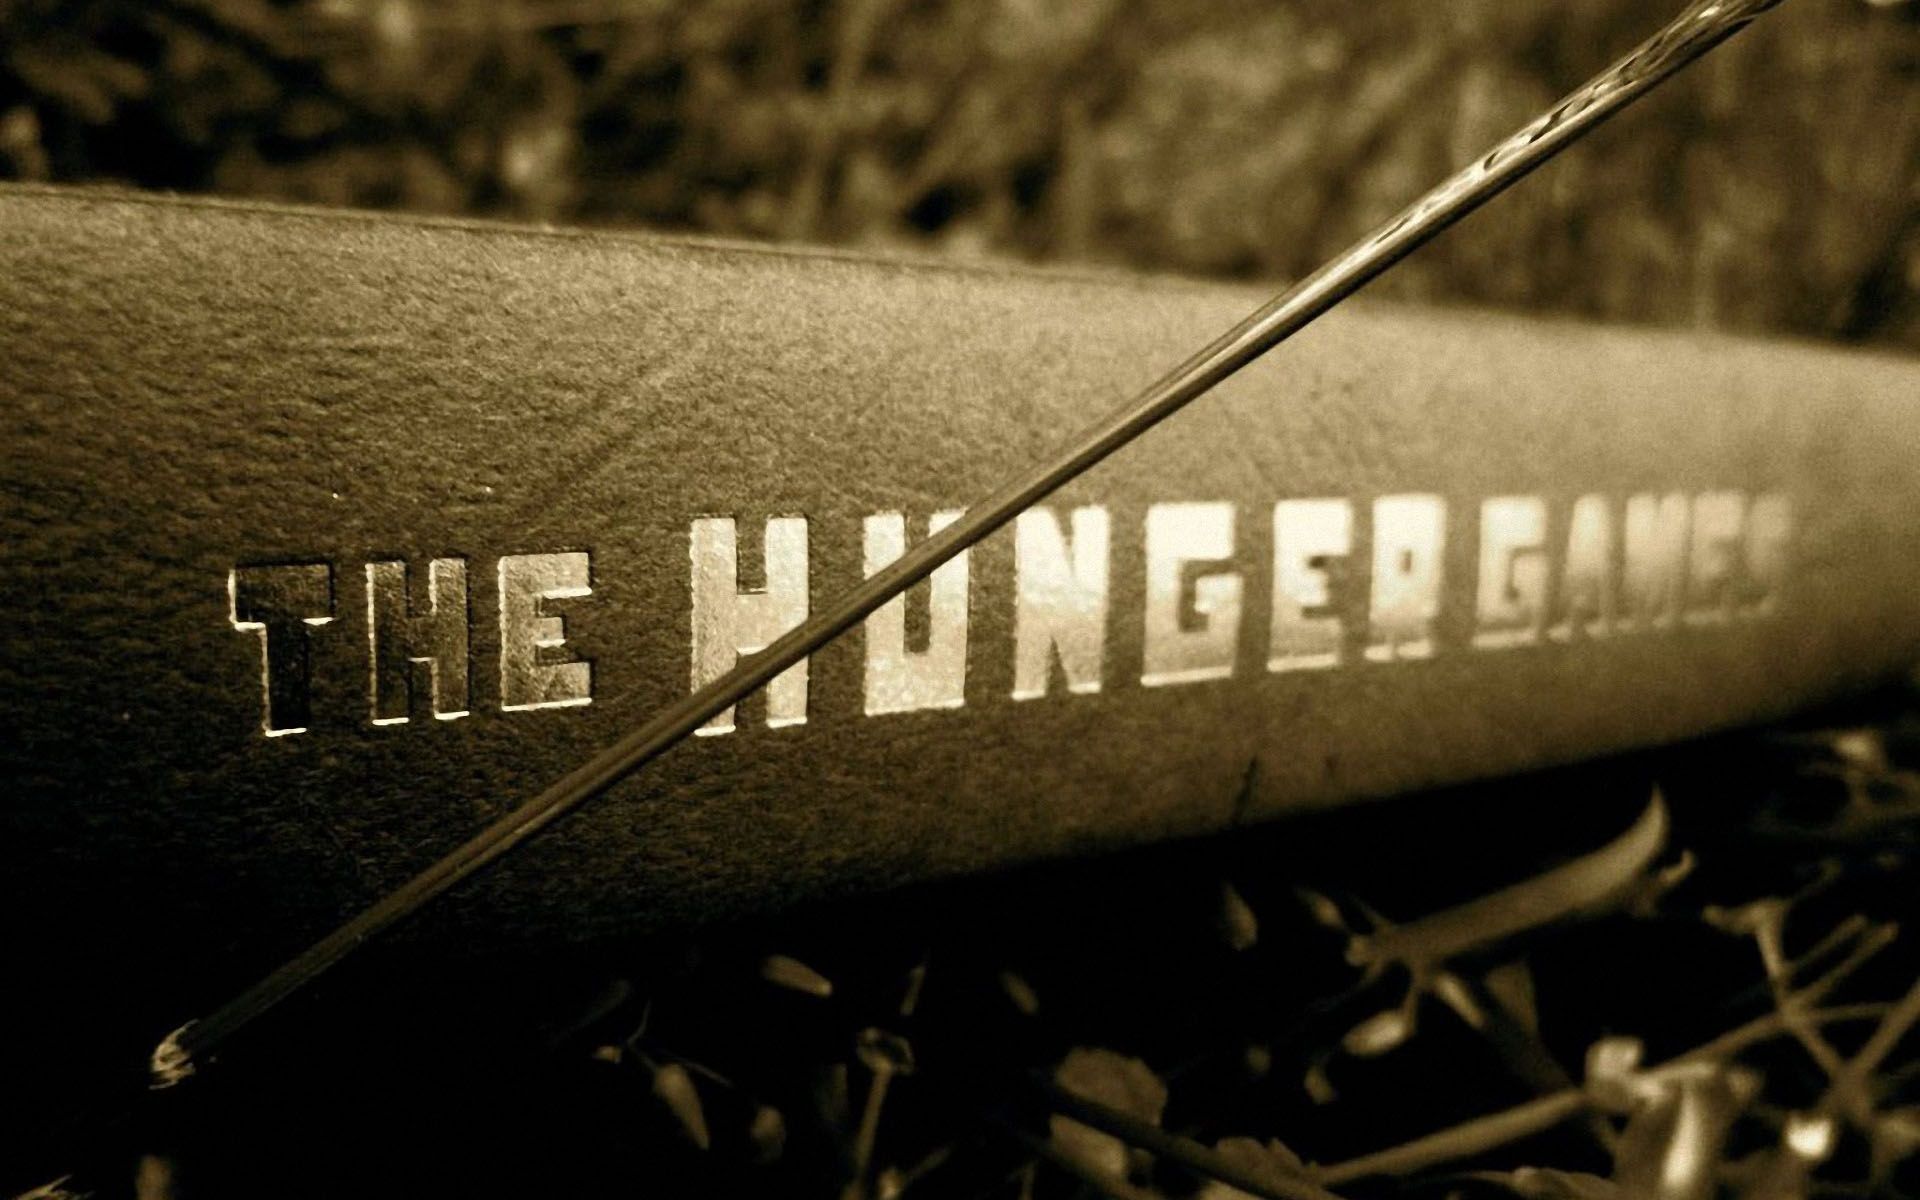 The Hunger Games Poster 1920x1200 Wallpapers, 1920x1200 Wallpapers ...